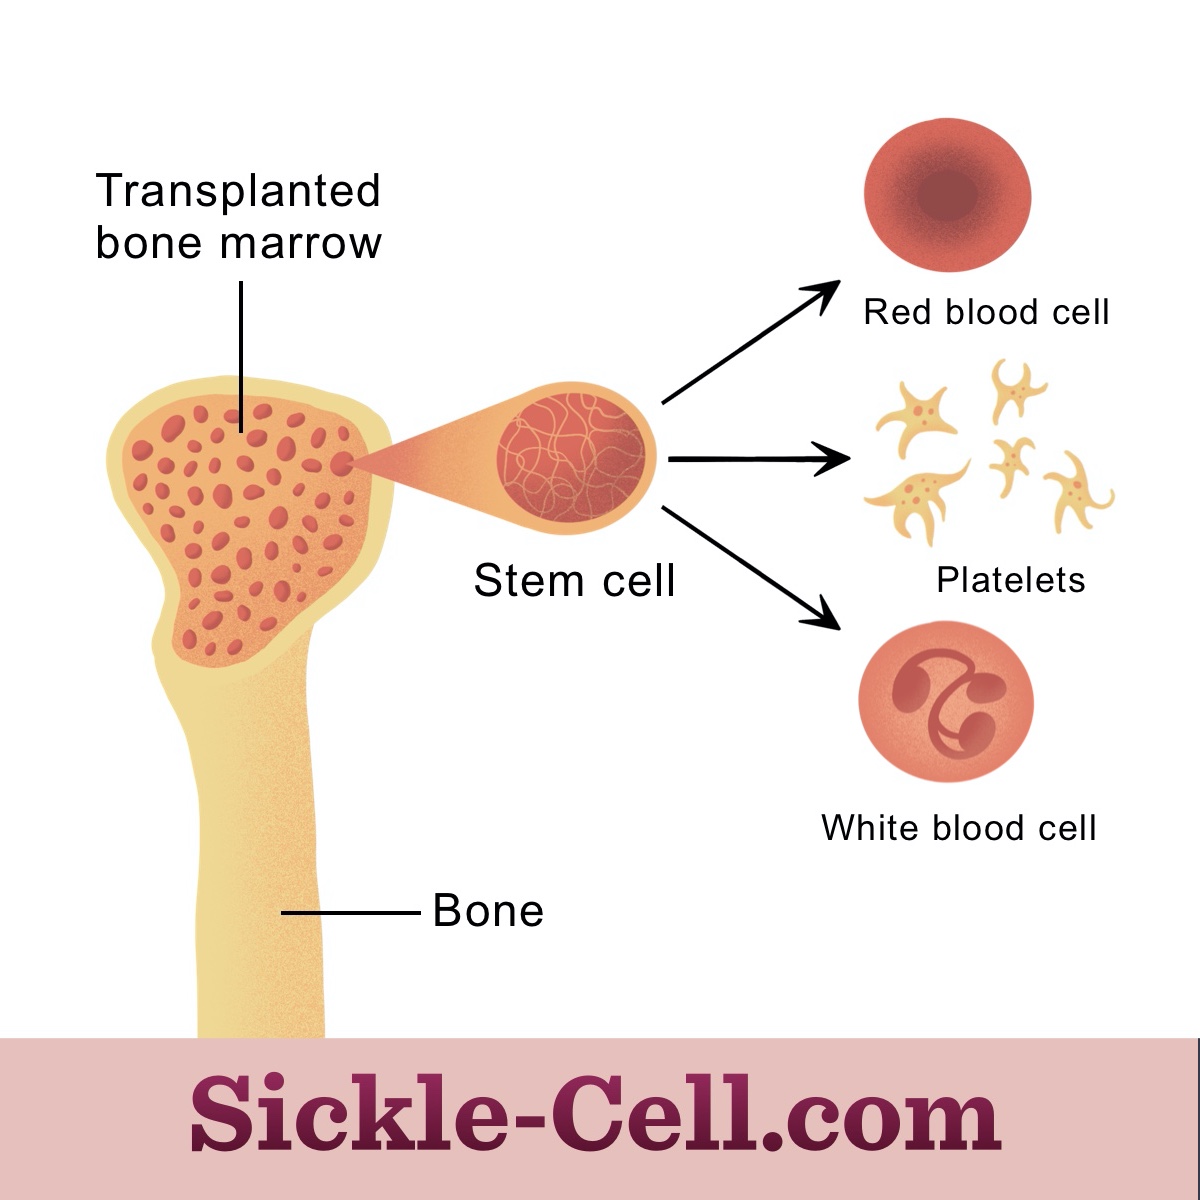 Bone marrow transfusions provide the body with unmutated stem cells. This allows for the generation of healthy blood cells.